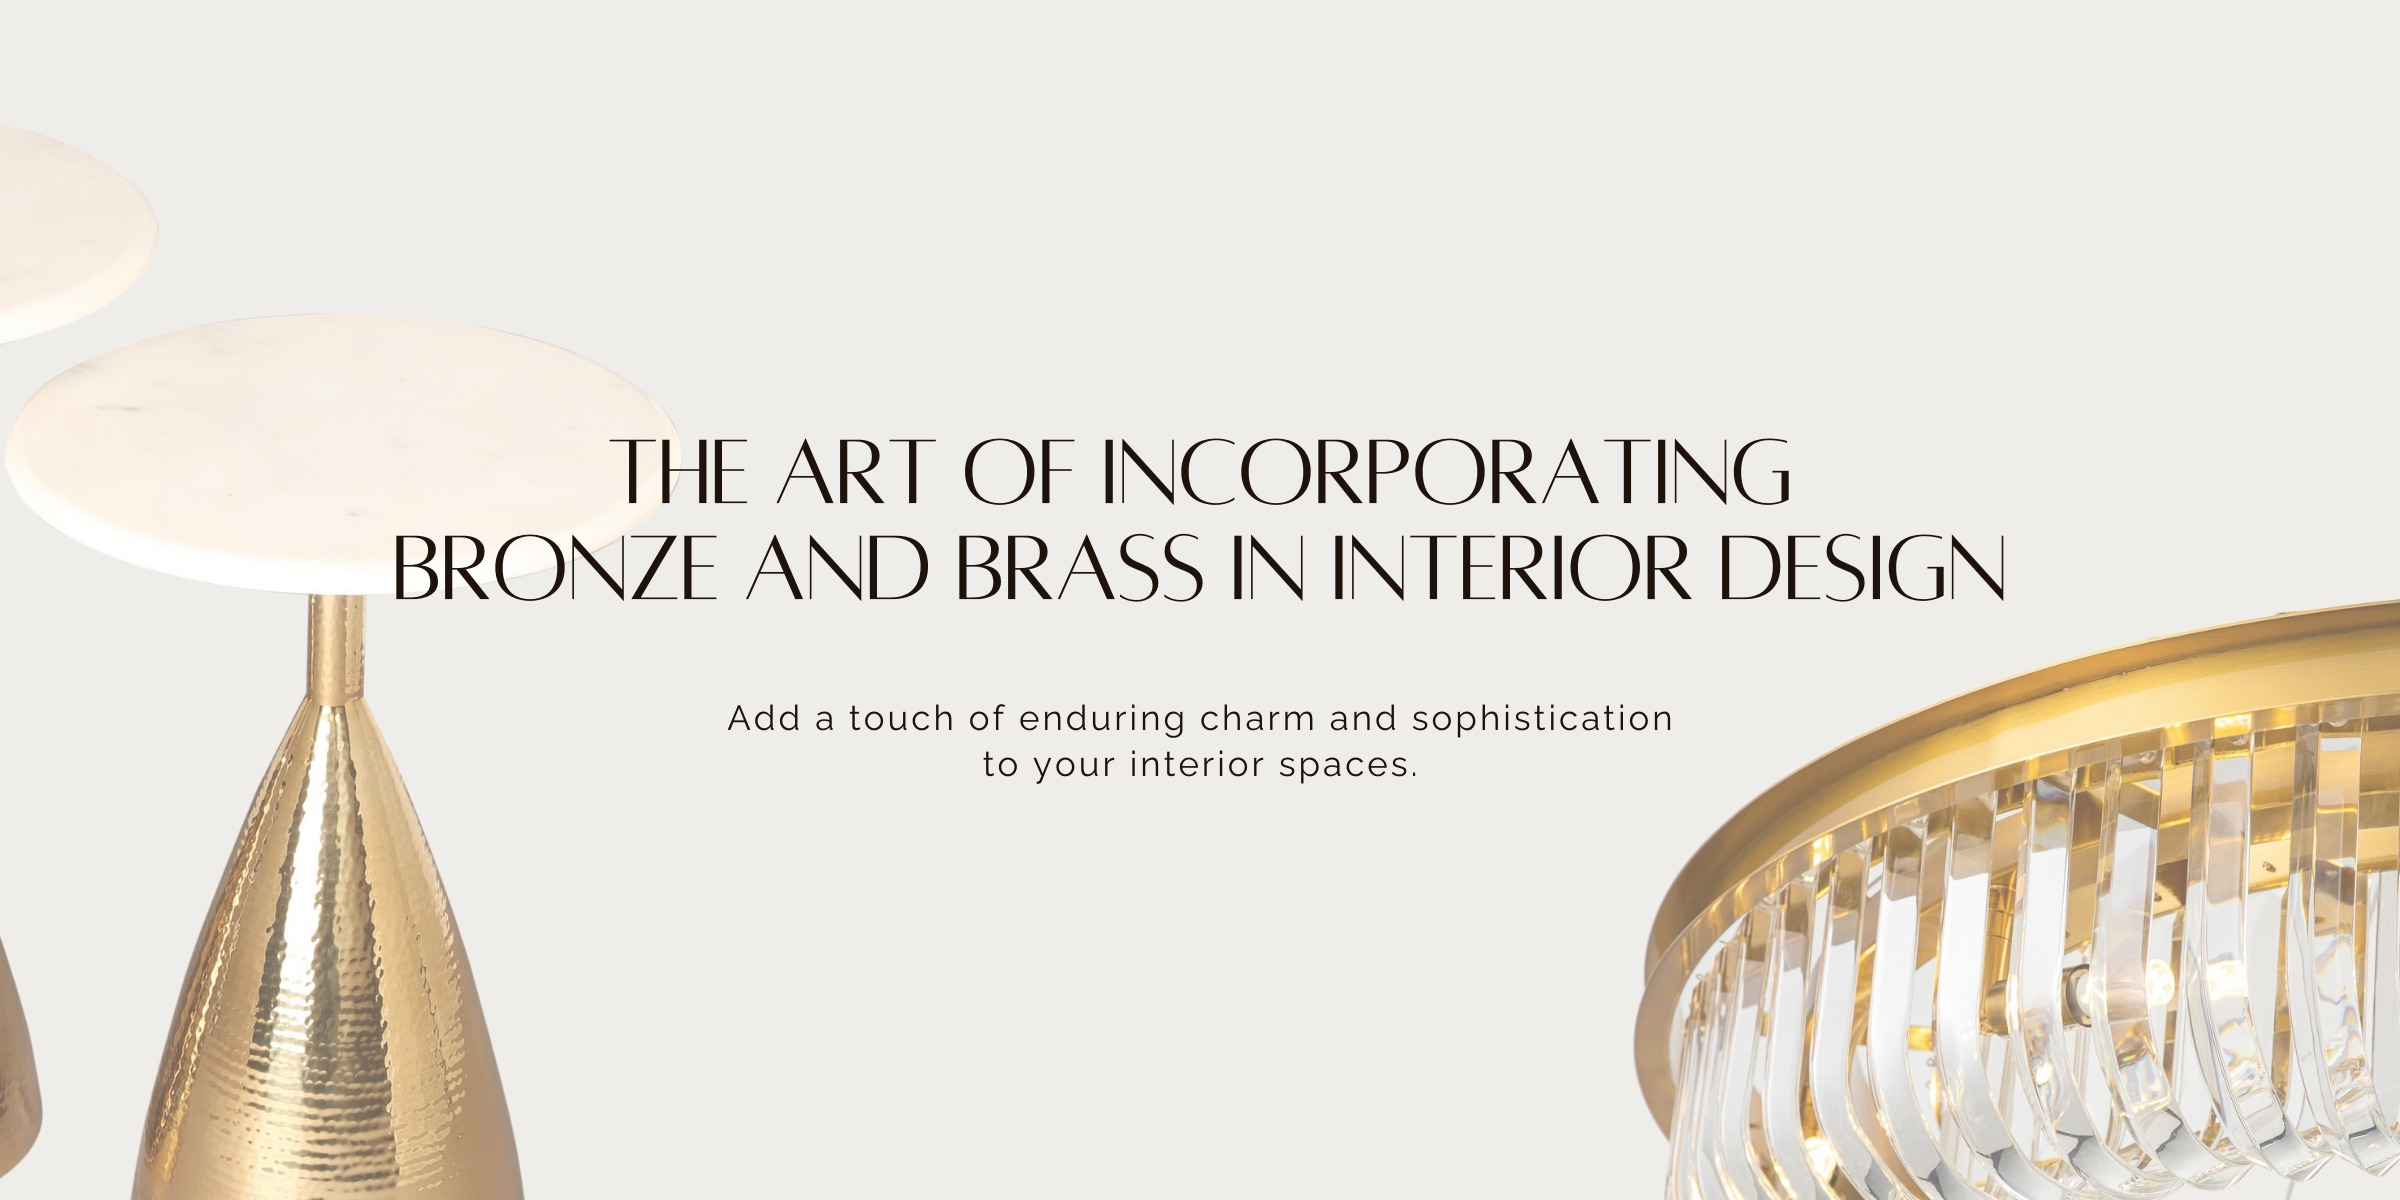 The Art of Incorporating Bronze and Brass in Interior Design